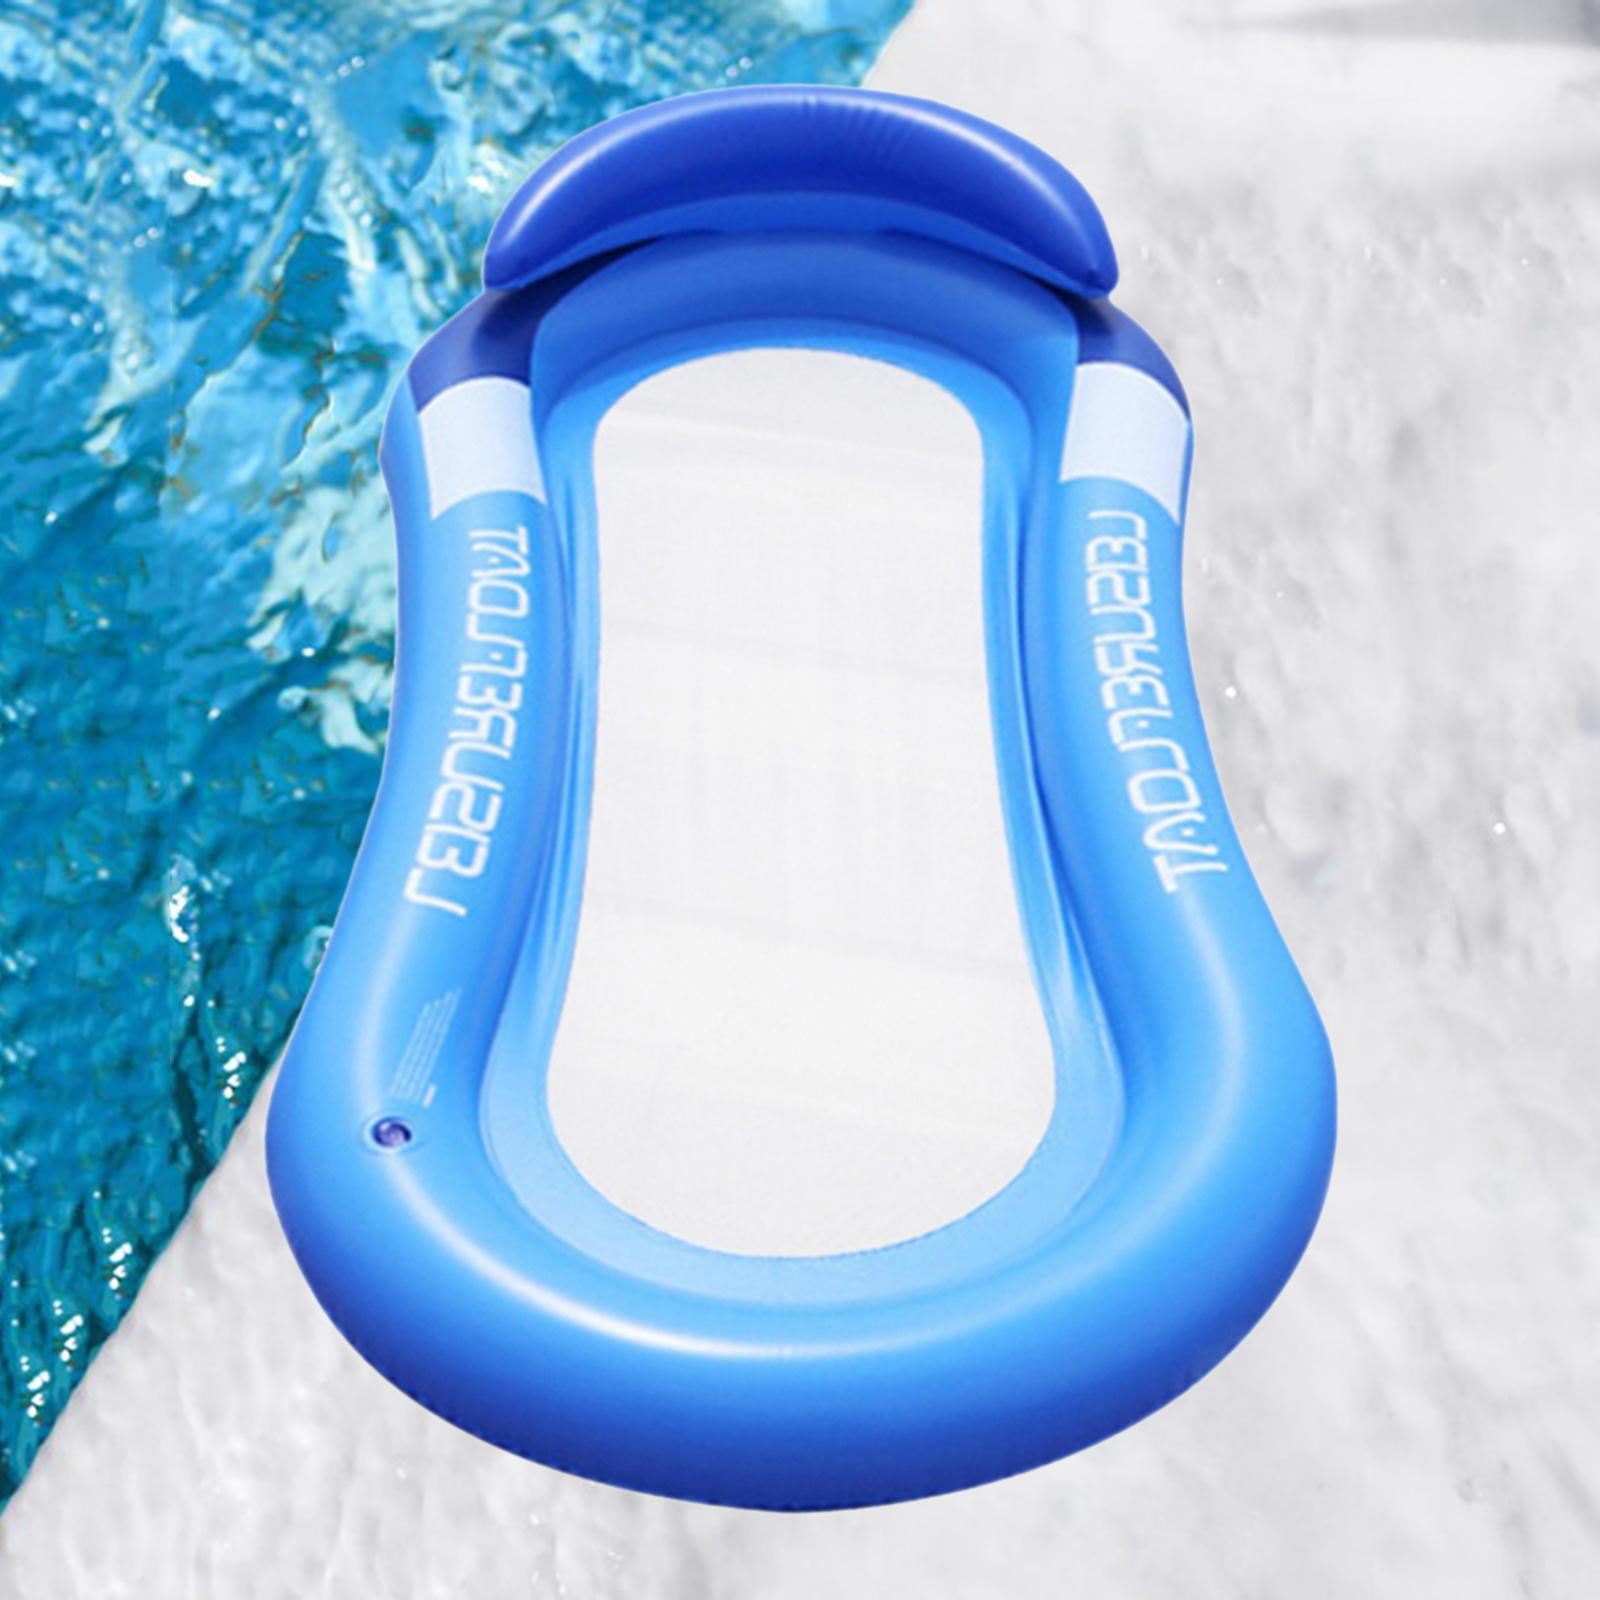 PVC INFLATABLE SWIMMING POOL BEACH SEA SUN LOUNGER AIR BED LILO FLOAT CHAIR